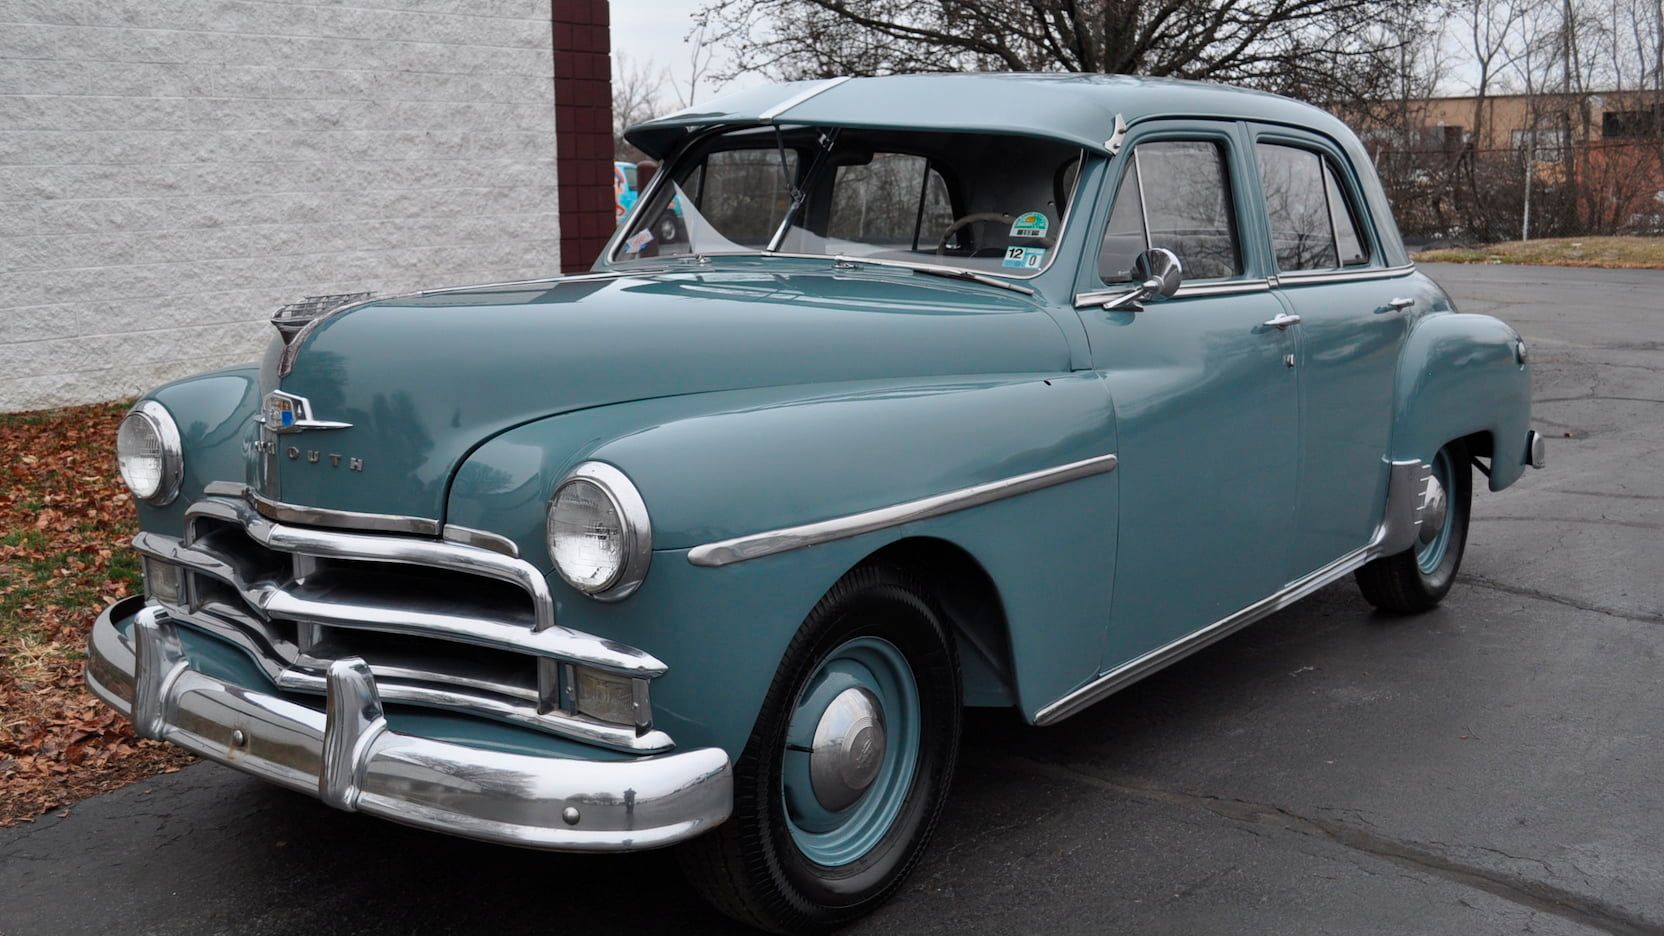 1950 Plymouth Special Deluxe in driveway gray